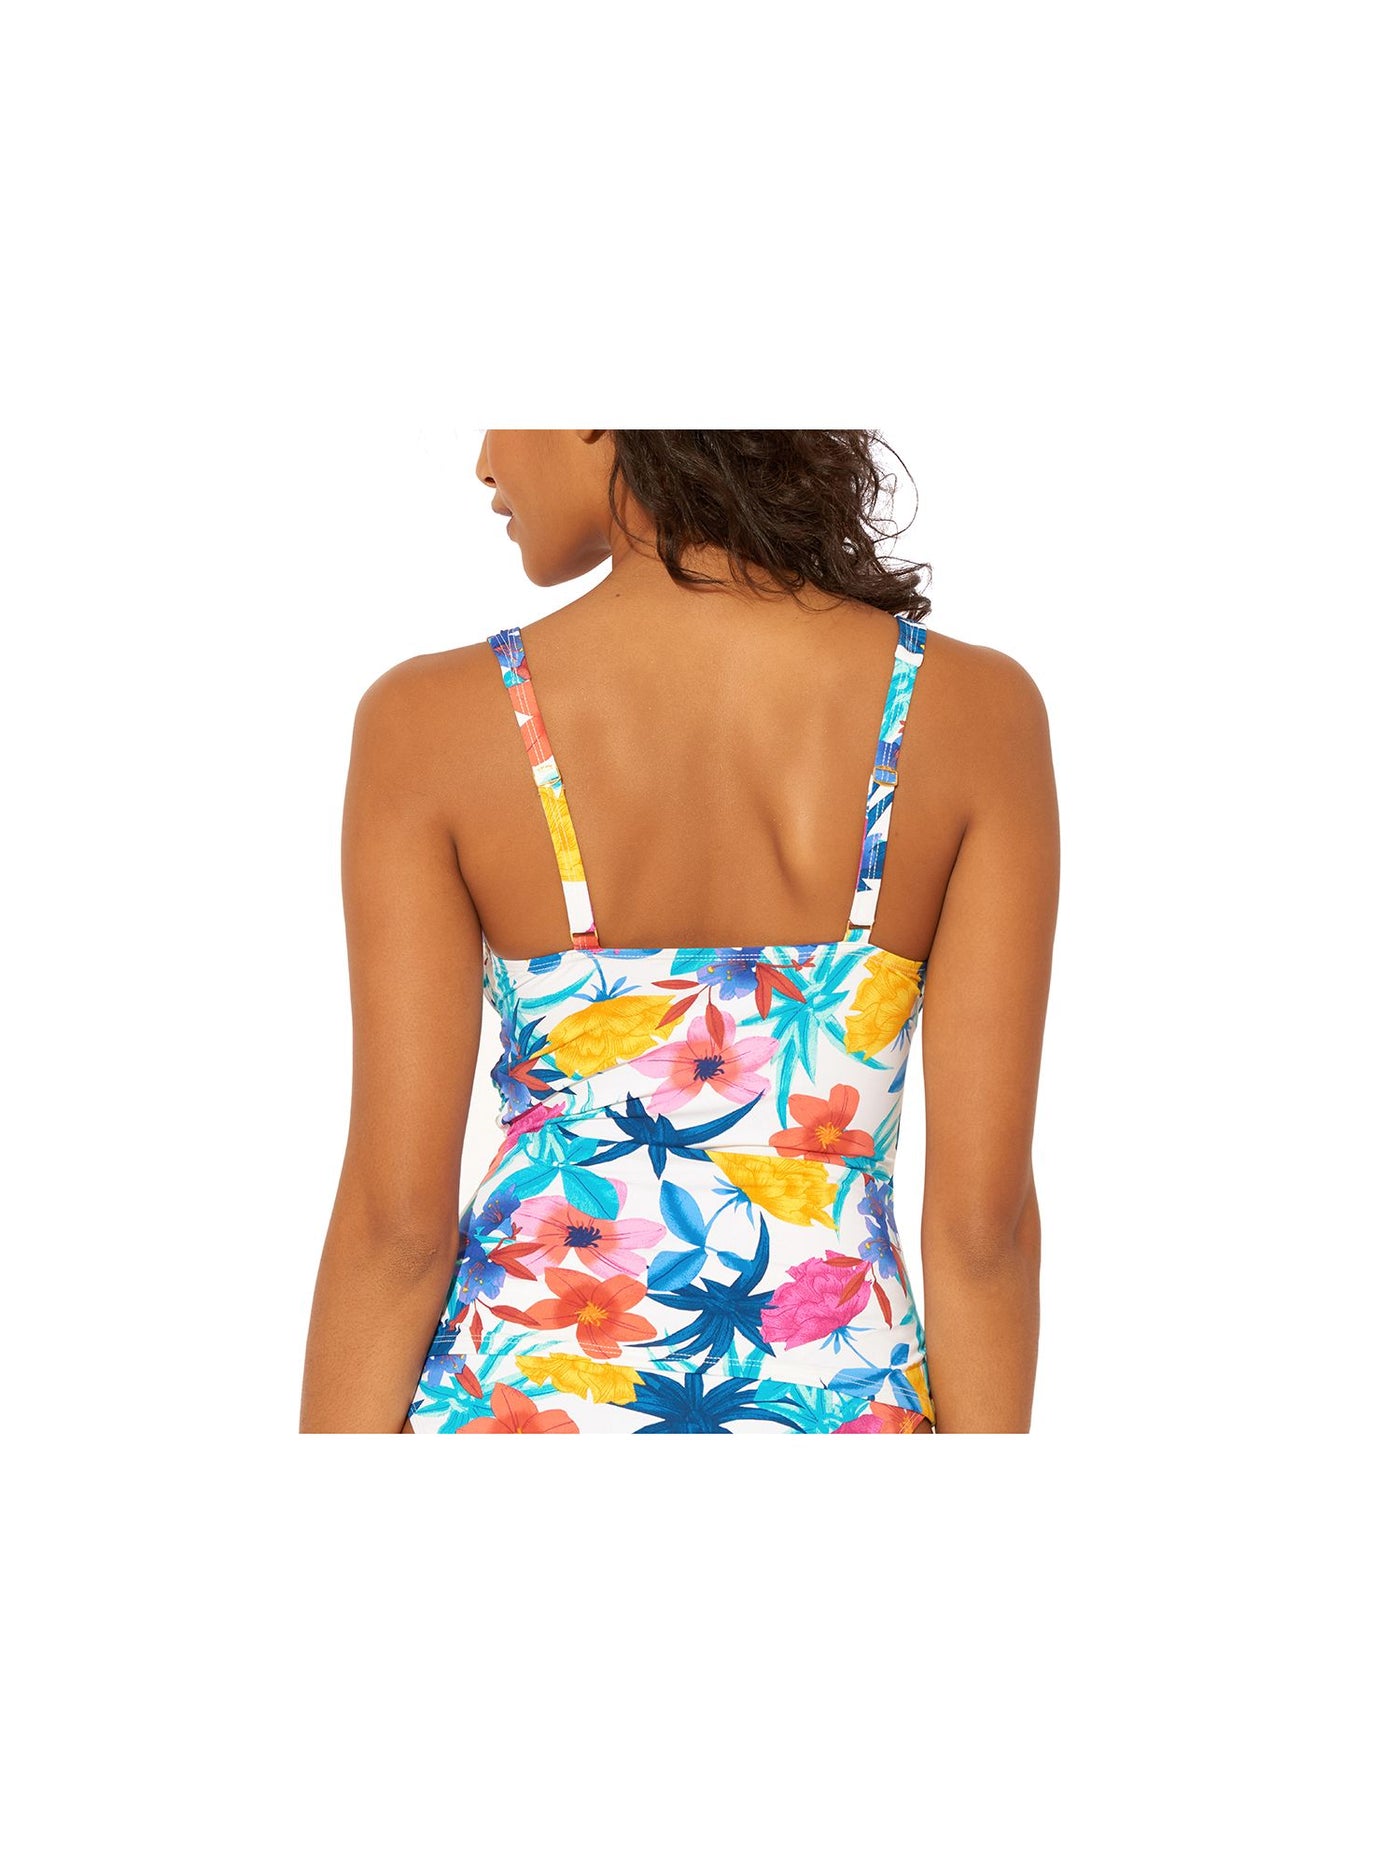 BLEU Women's Multi Color Floral Stretch Shirred Molded Cups Lined Deep V Neck Adjustable Tankini Swimsuit Top 8